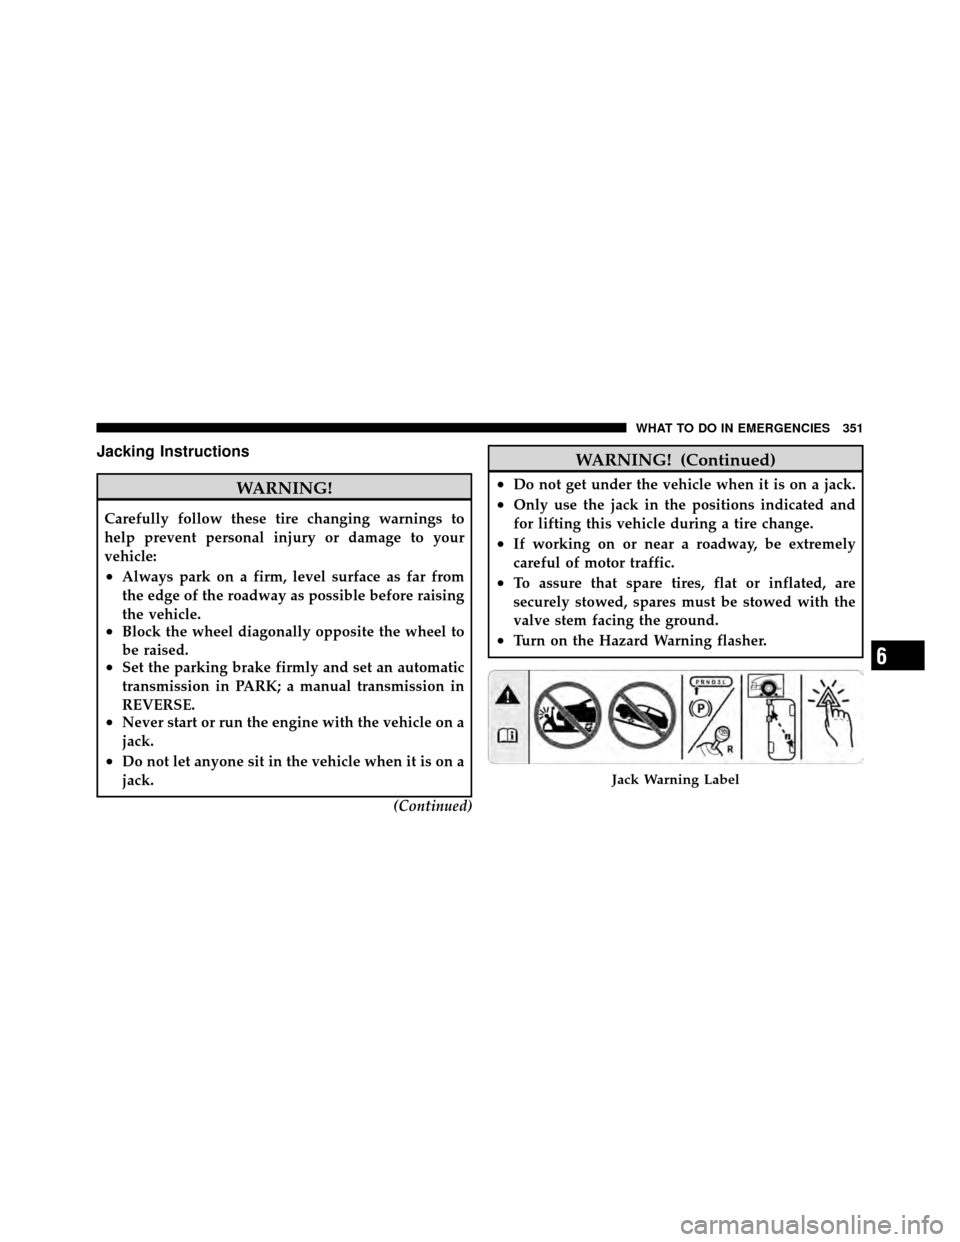 JEEP GRAND CHEROKEE 2010 WK / 3.G Owners Manual Jacking Instructions
WARNING!
Carefully follow these tire changing warnings to
help prevent personal injury or damage to your
vehicle:
•Always park on a firm, level surface as far from
the edge of t